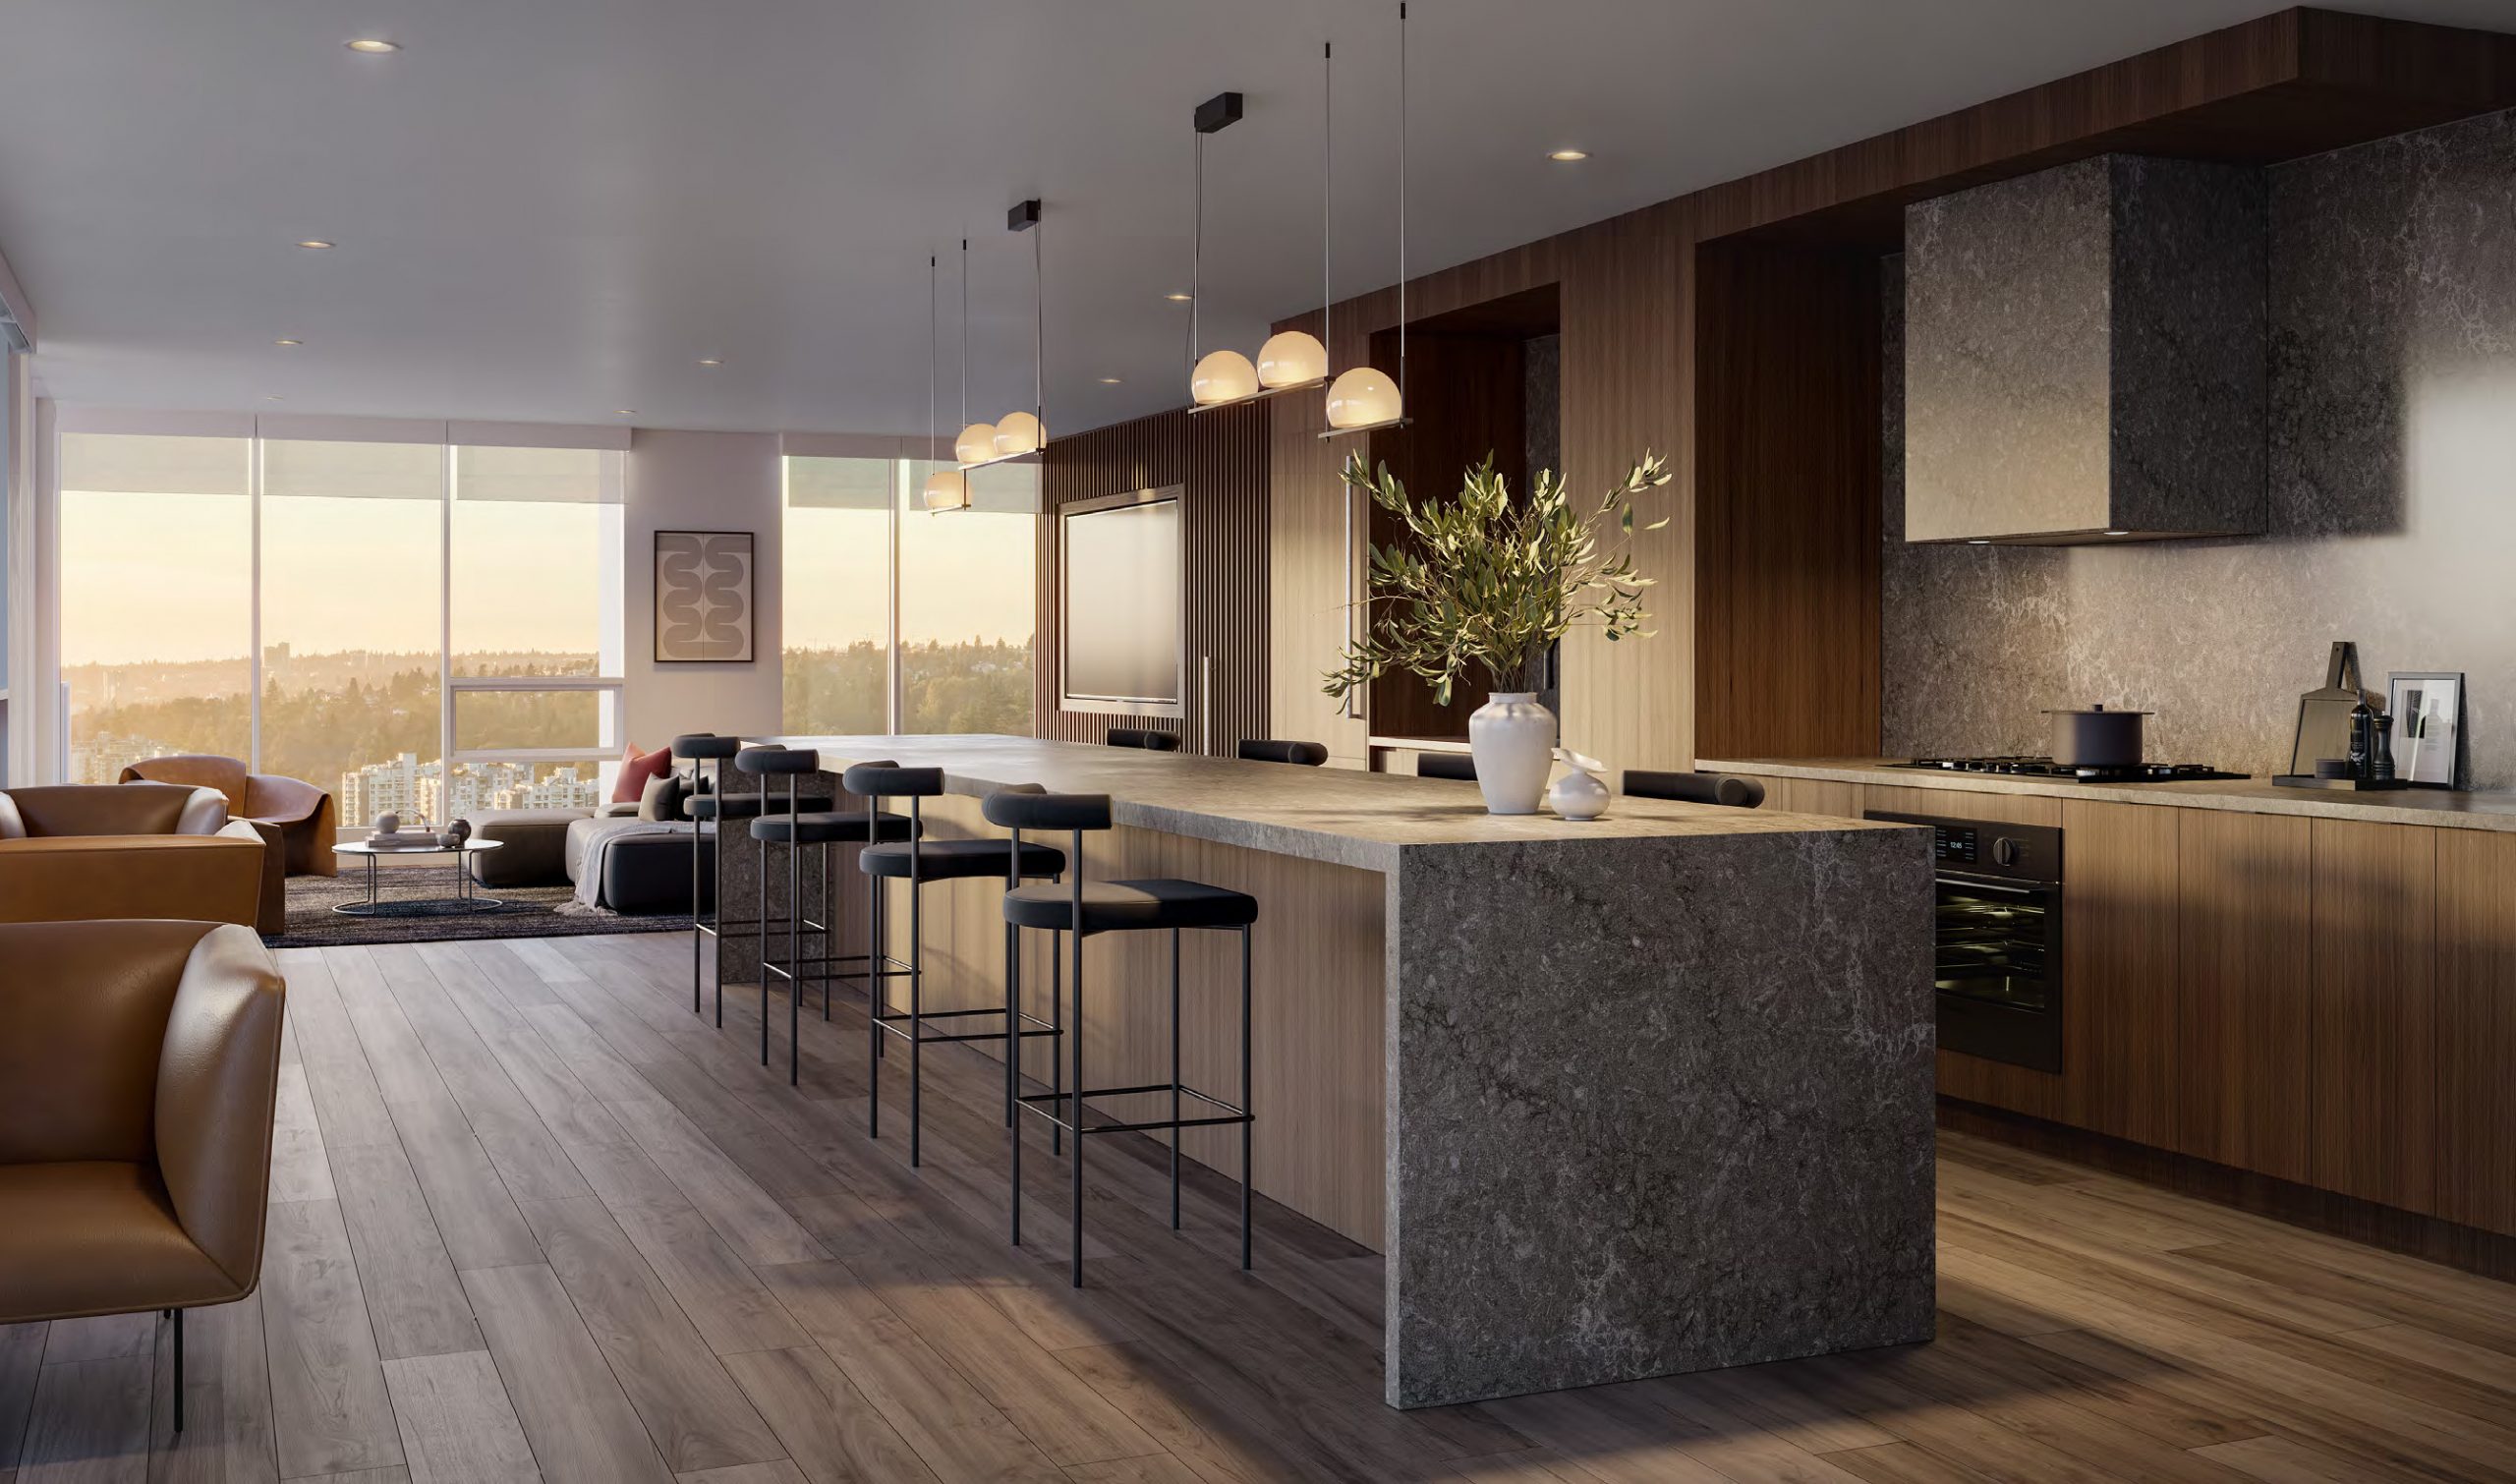 Harlin kitchen and living space